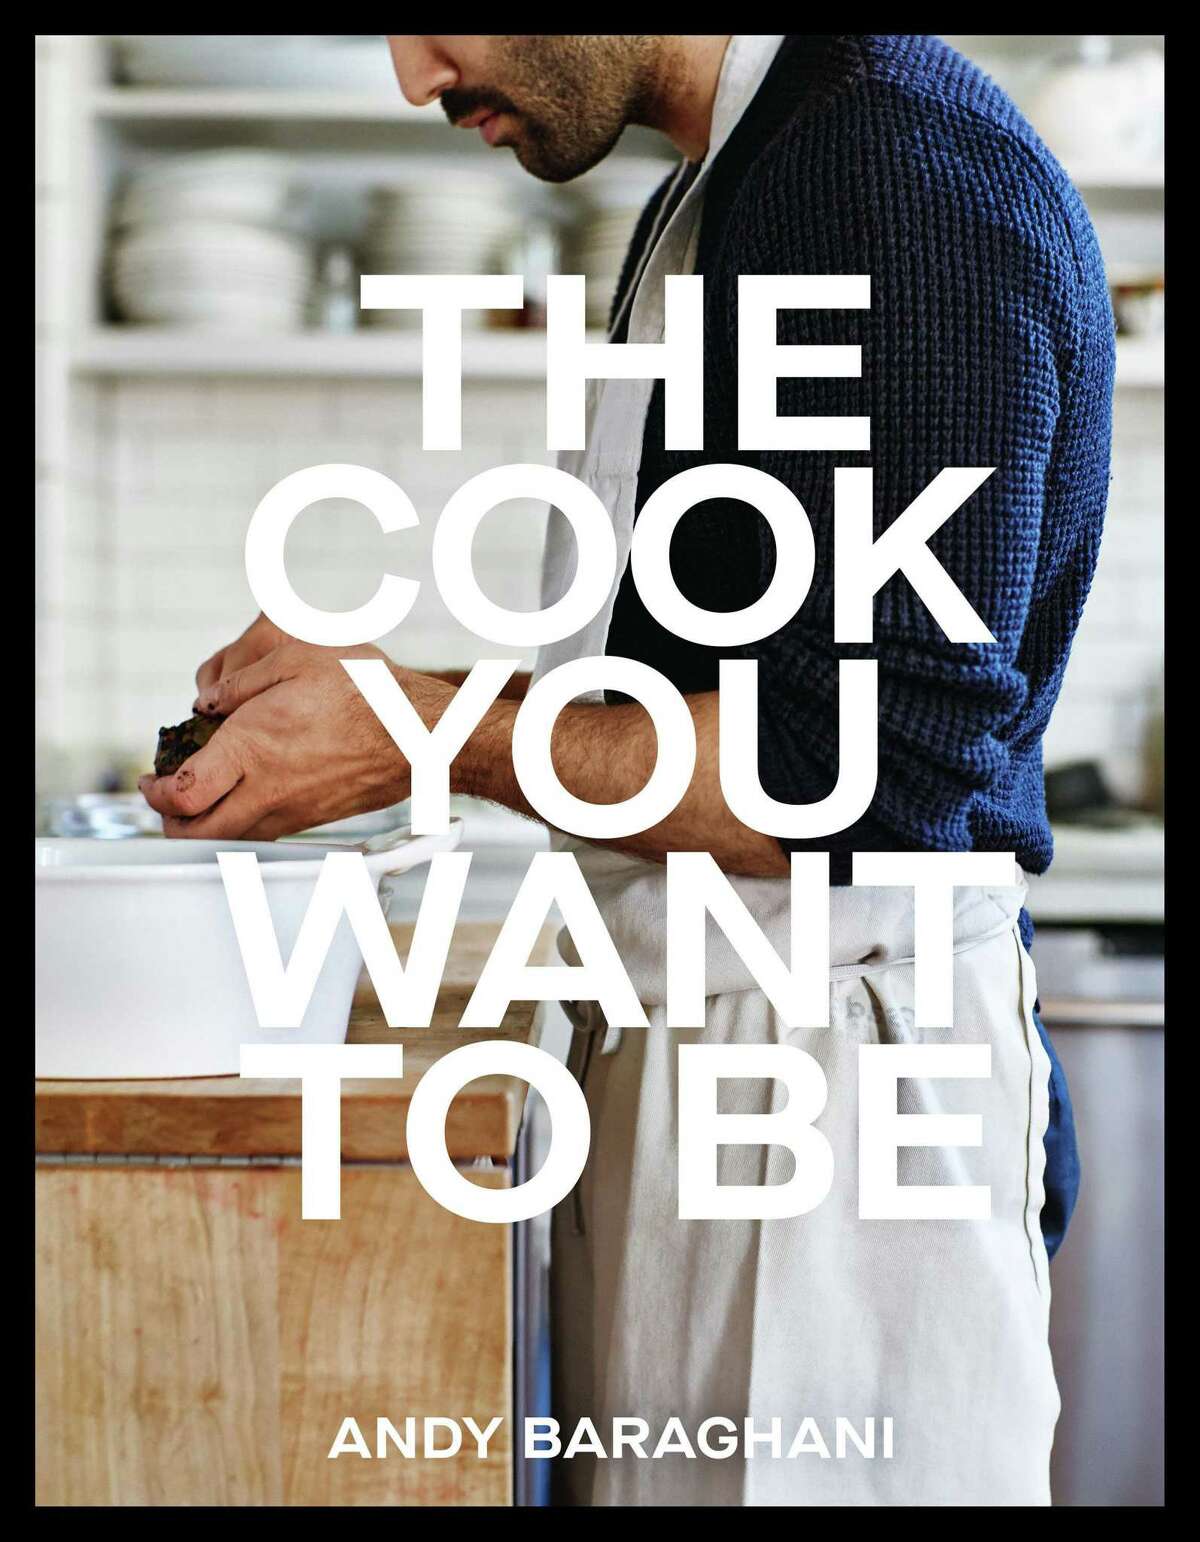 “The Cook You Want to Be” cookbook by Andy Baraghani.